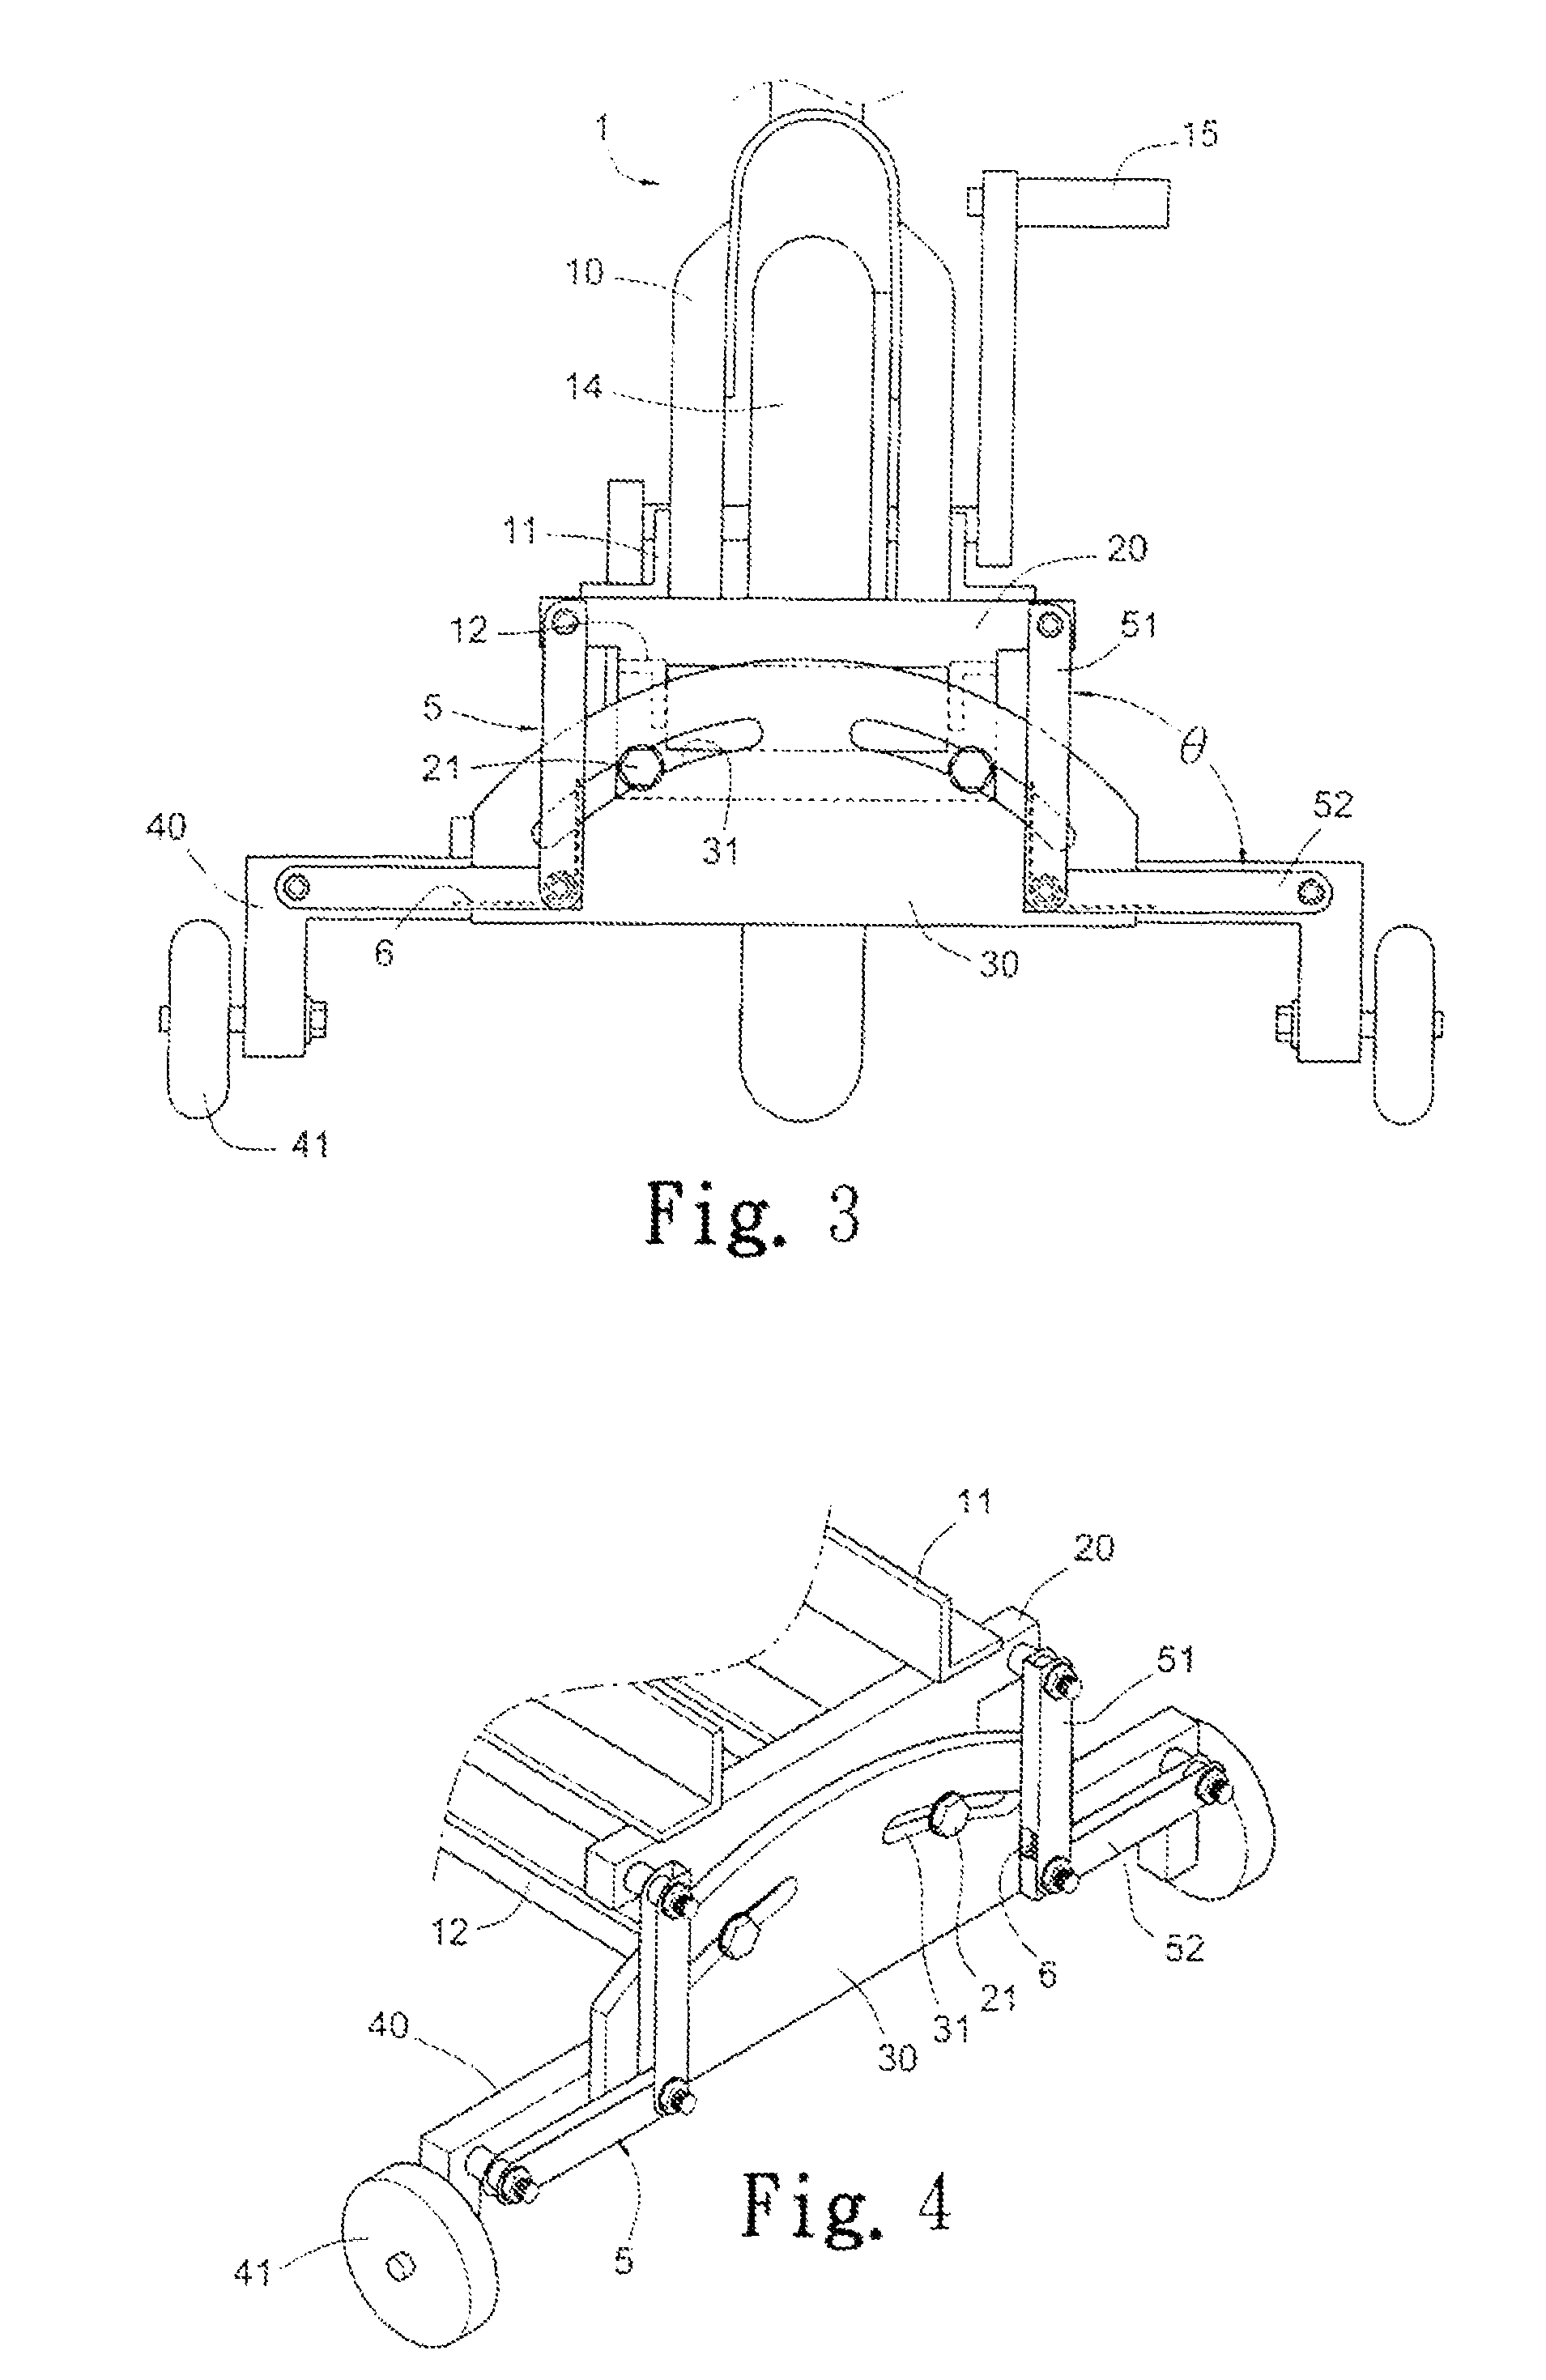 Safeguard wheel assembly for a two-wheeled vehicle